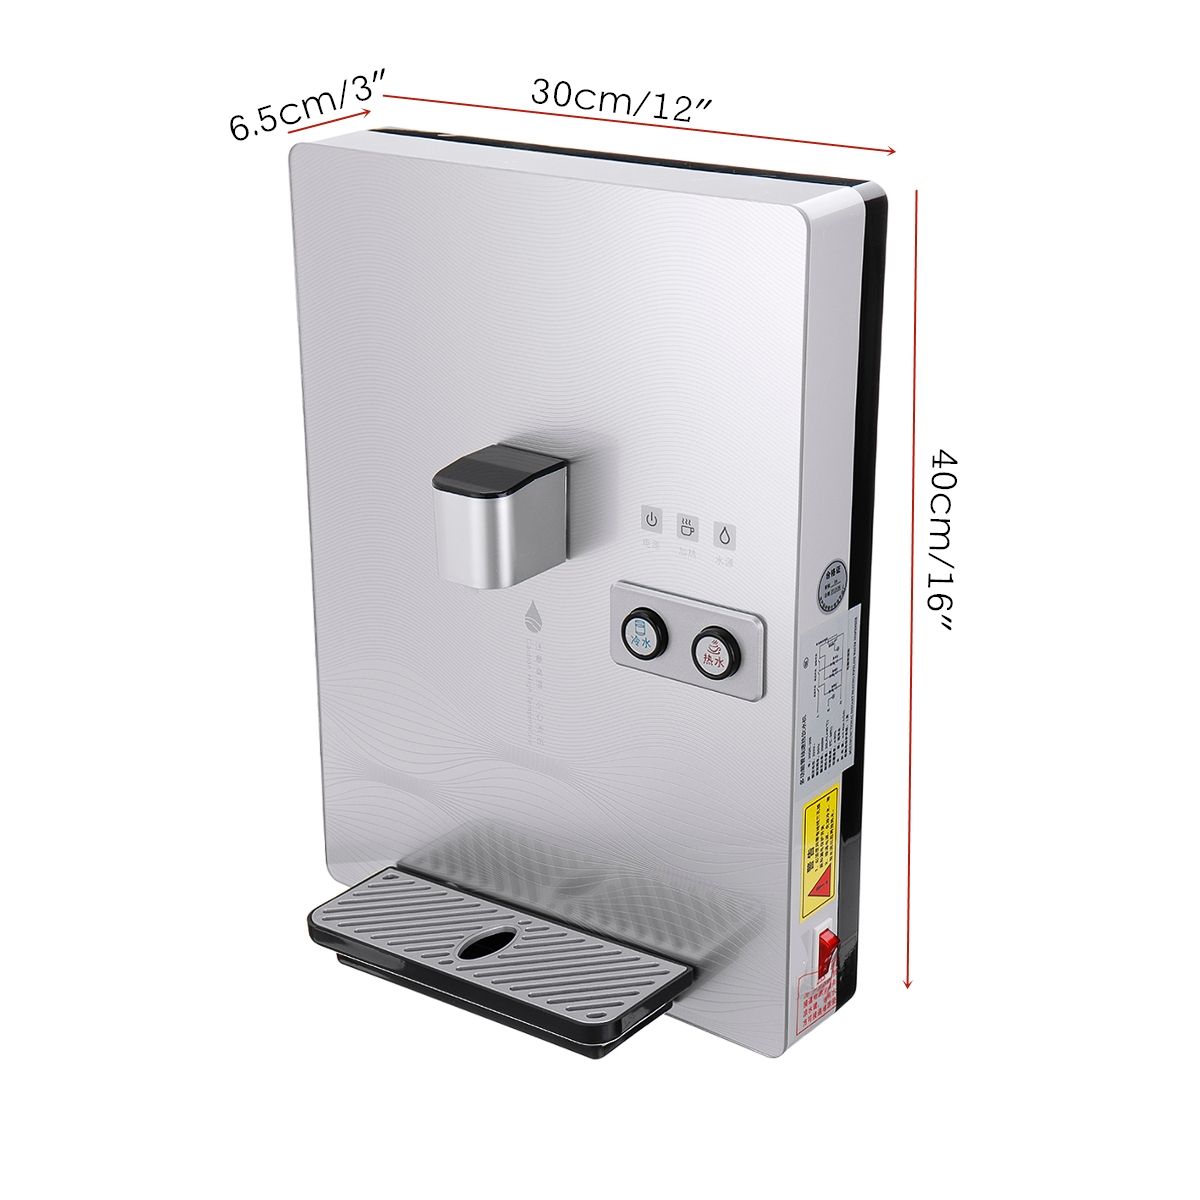 2000W-Wall-Mounted-Drinker-Electric-Hot-Cold-Water-Dispensers-Water-Pumping-Device-1594502